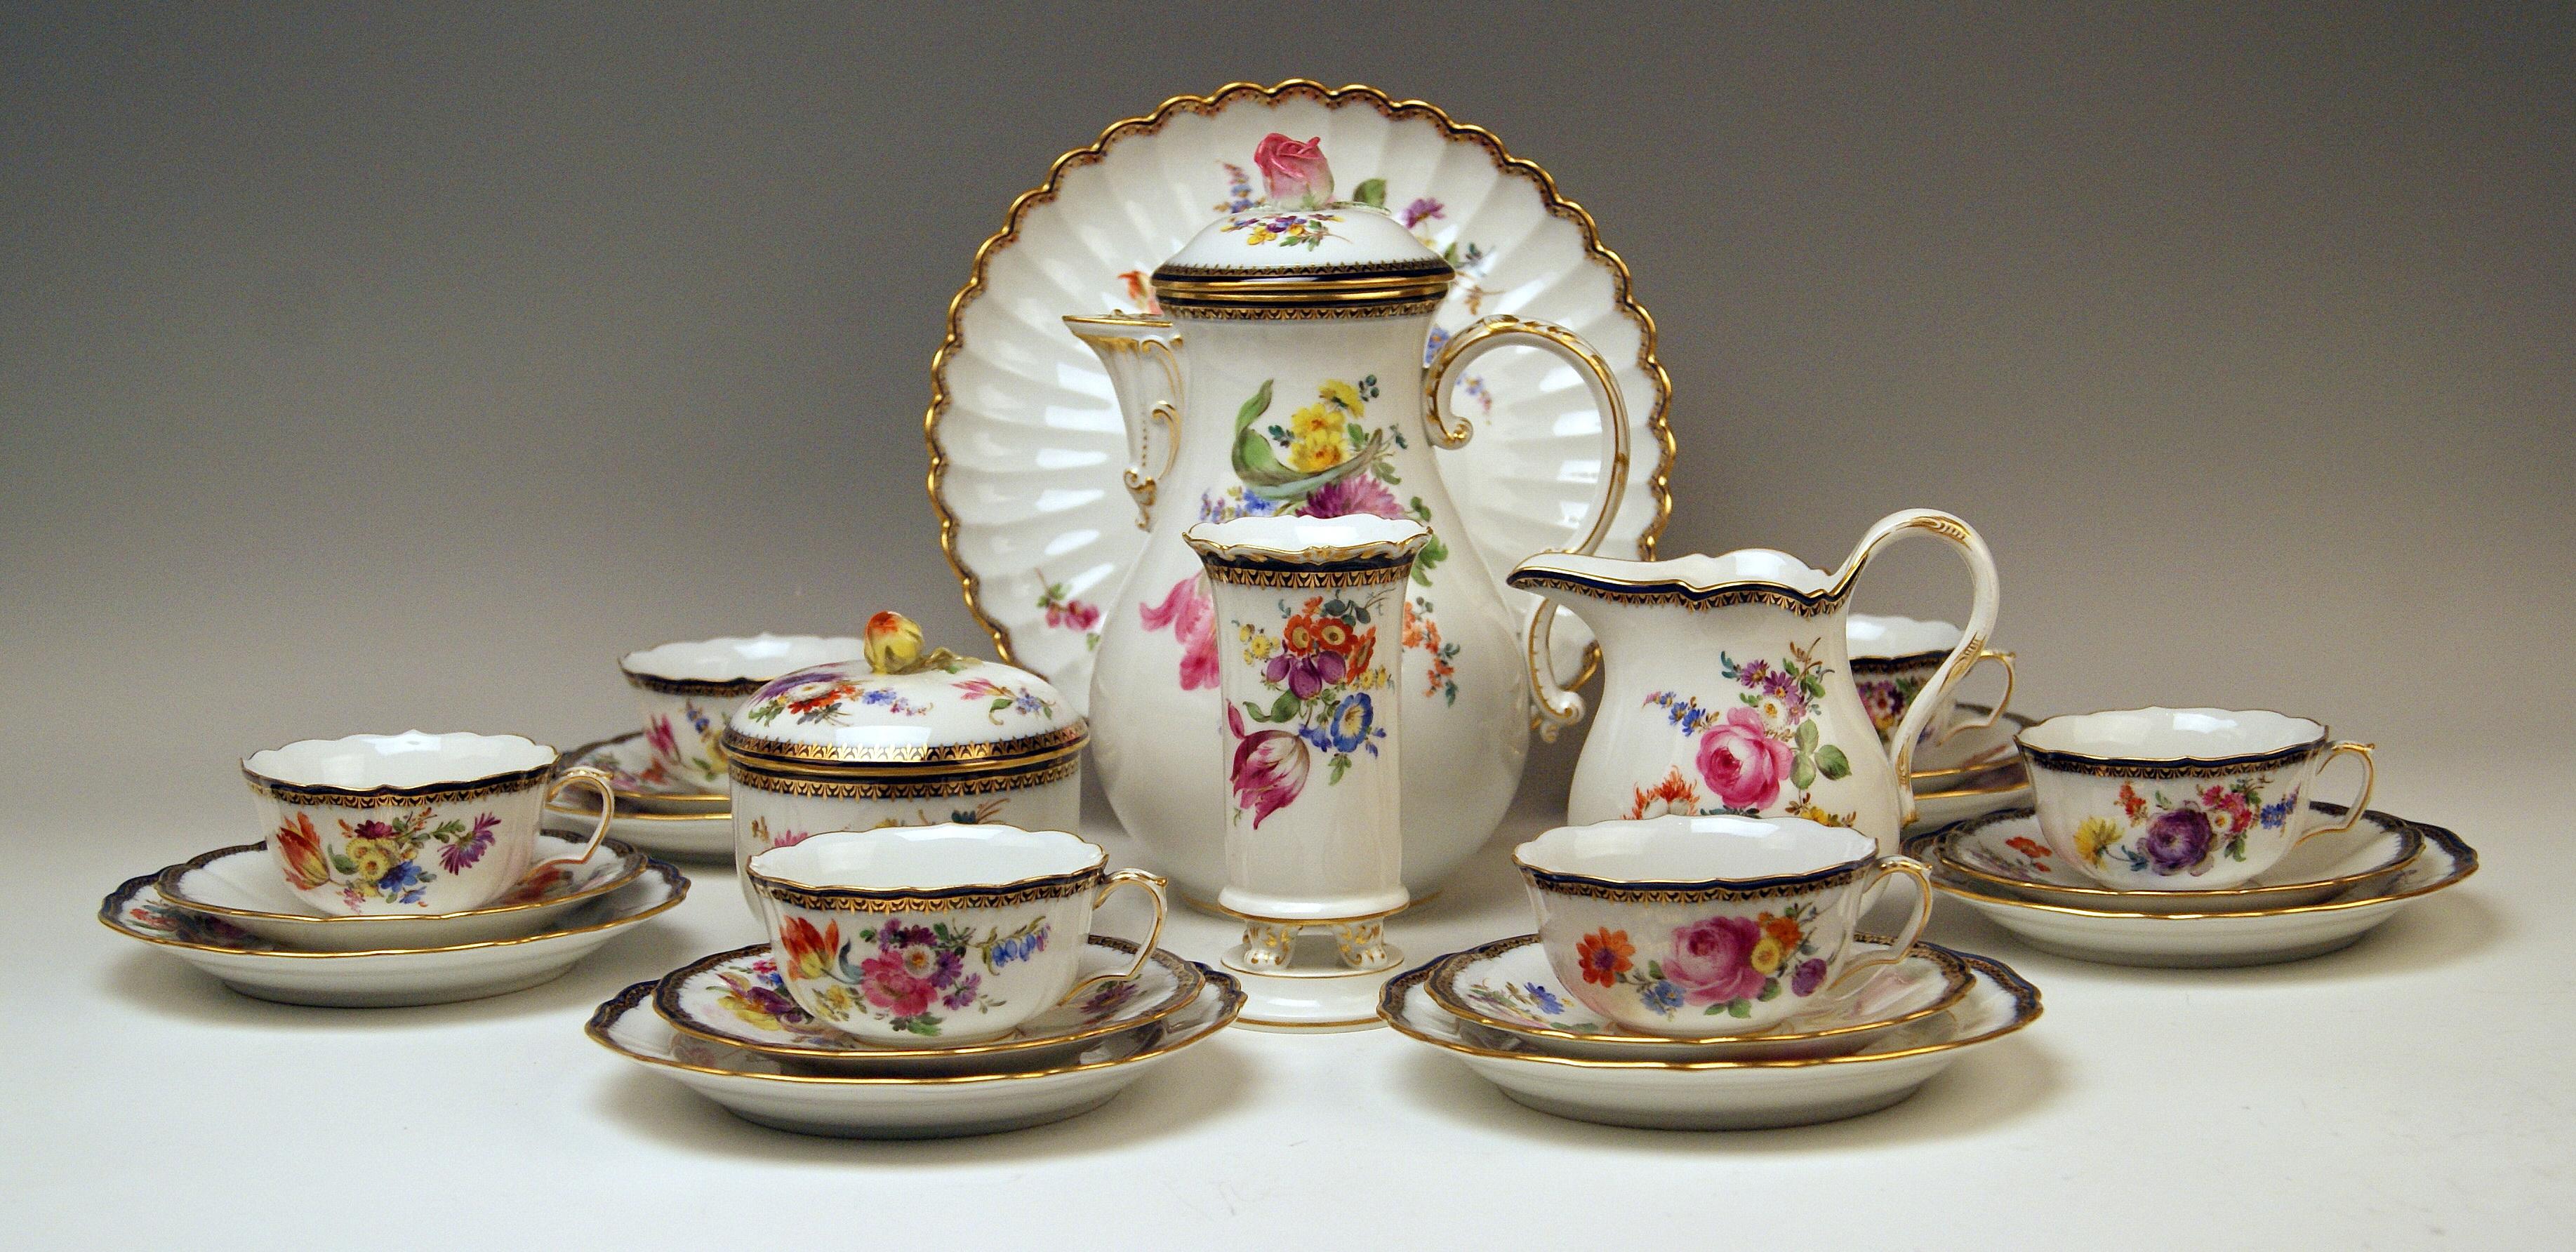 We invite you here to look at a splendid Meissen coffee set for six persons: 

This coffee set is of finest appearance due to gorgeous various multicolored flower paintings: 
Flower bouquets and smaller flowers laid on white porcelain = this